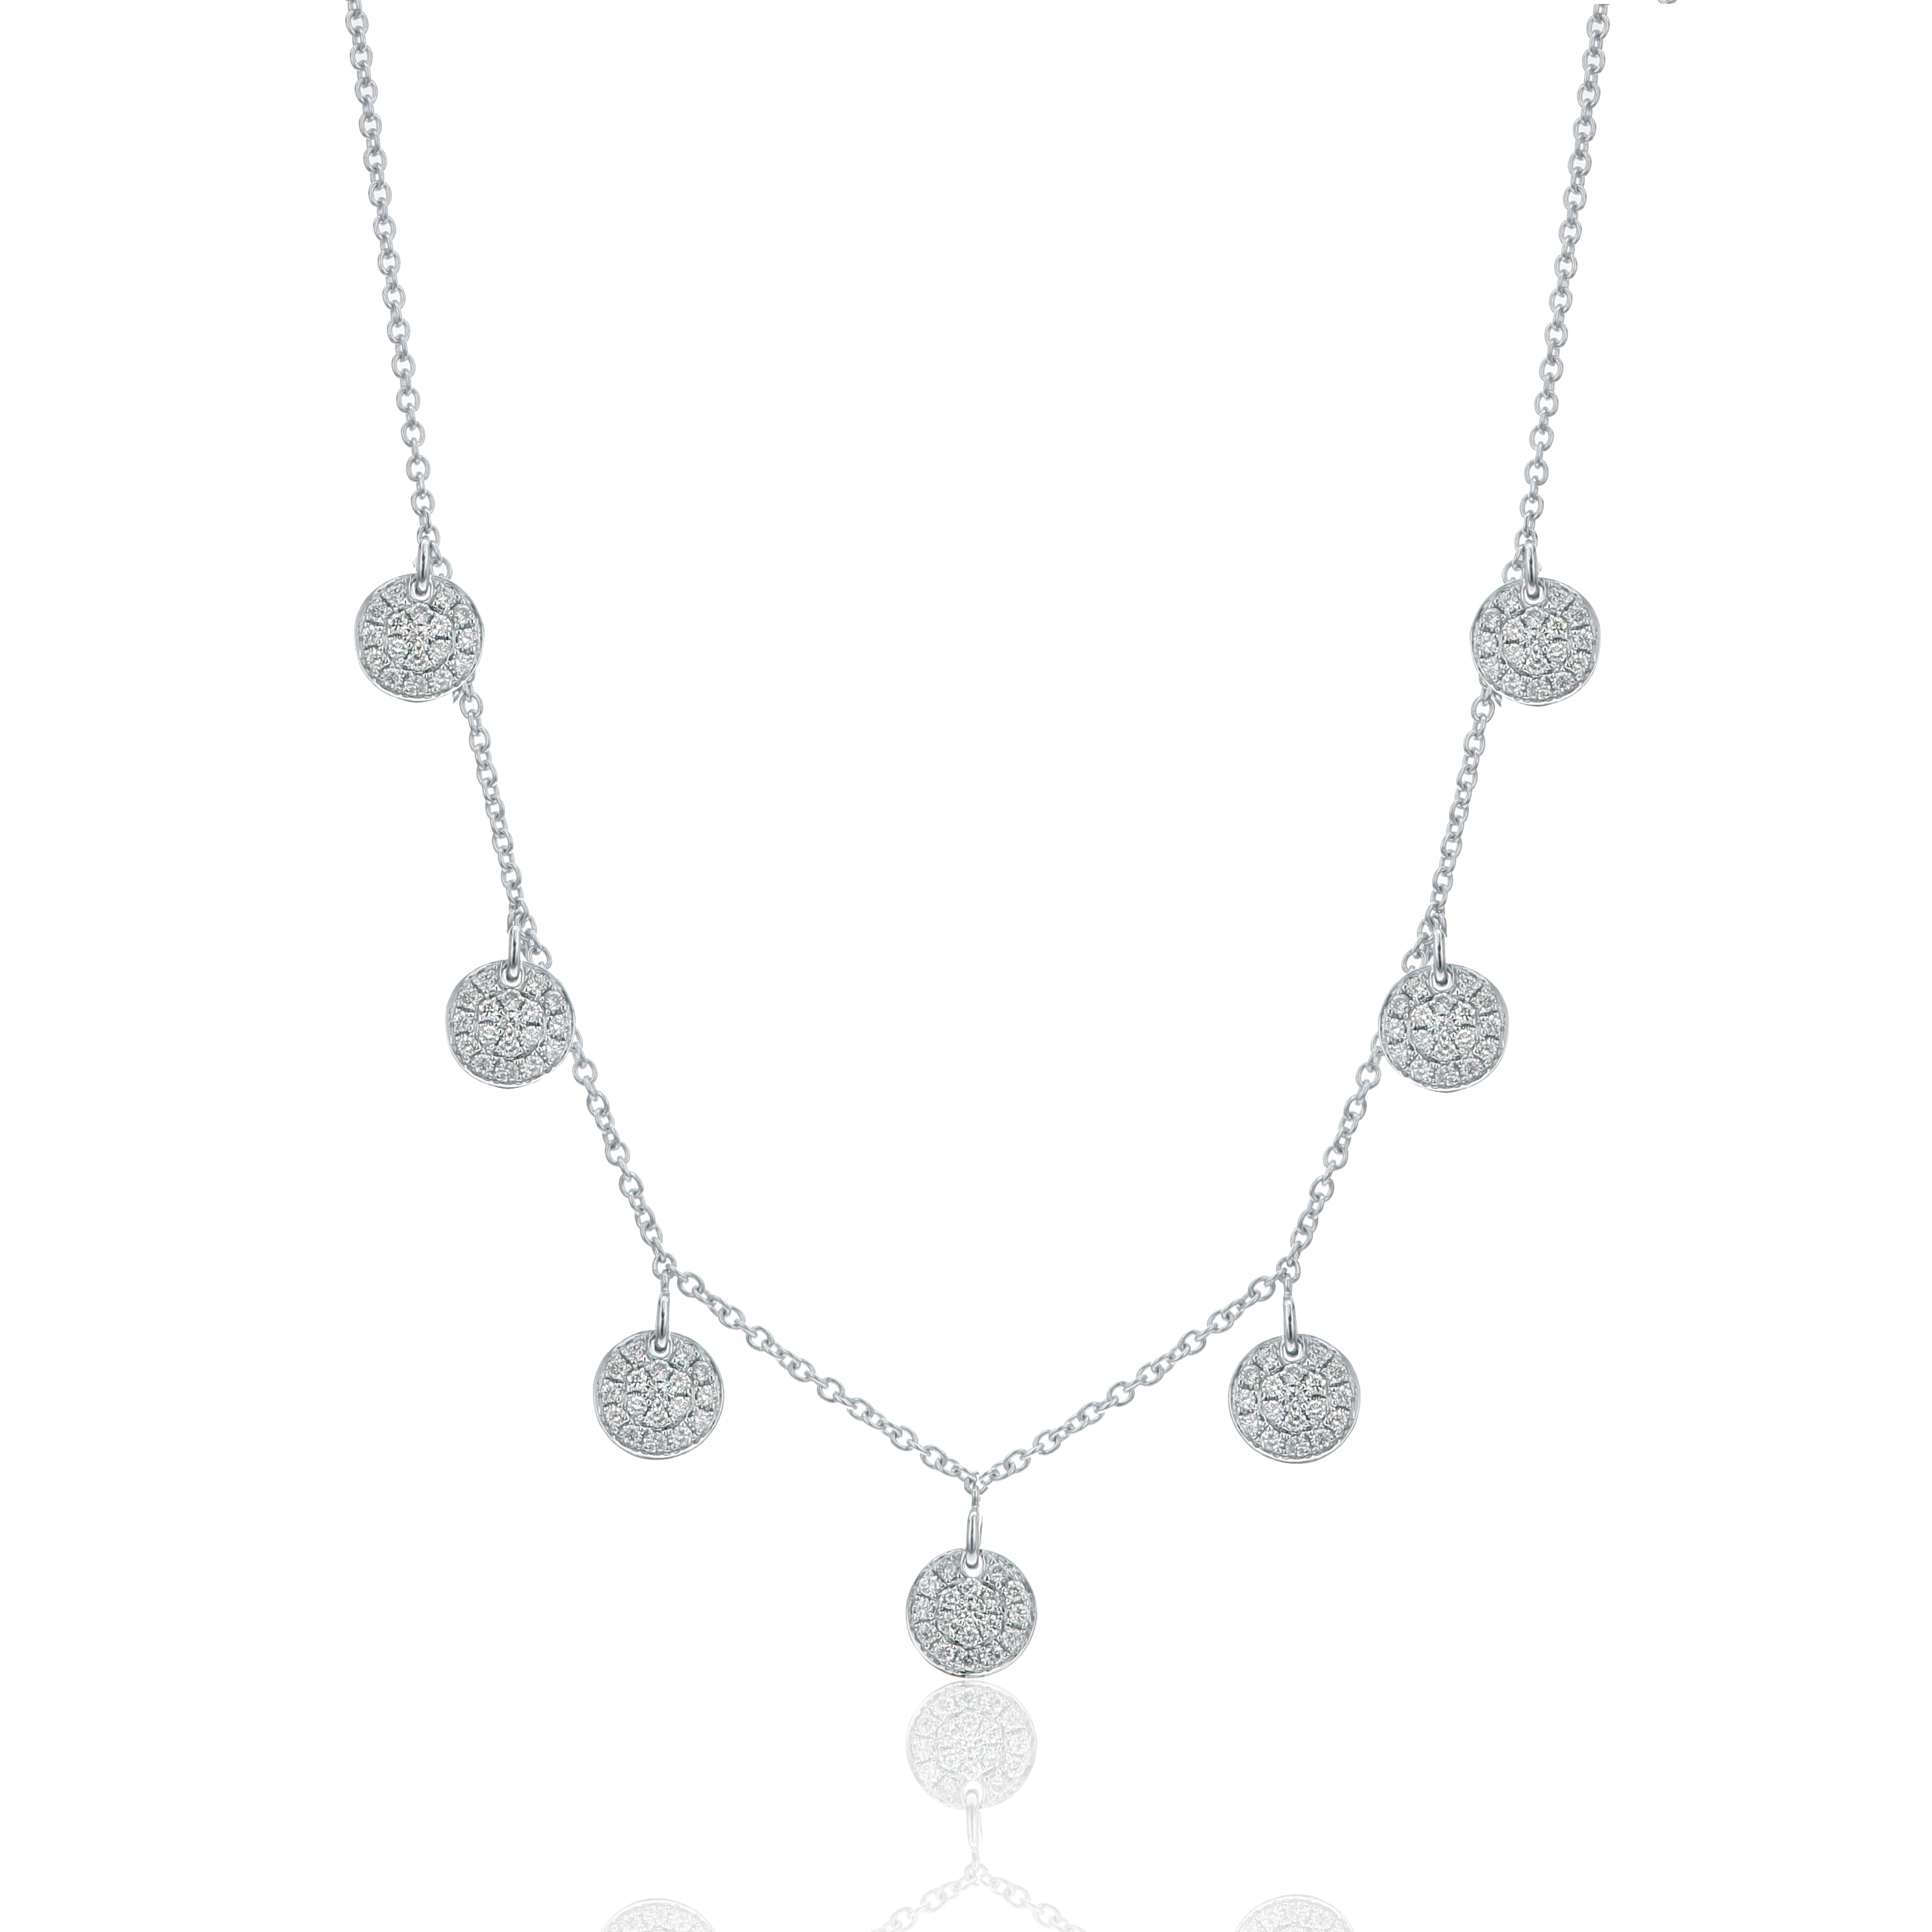 An 18k White Gold 7 Disc Necklace 